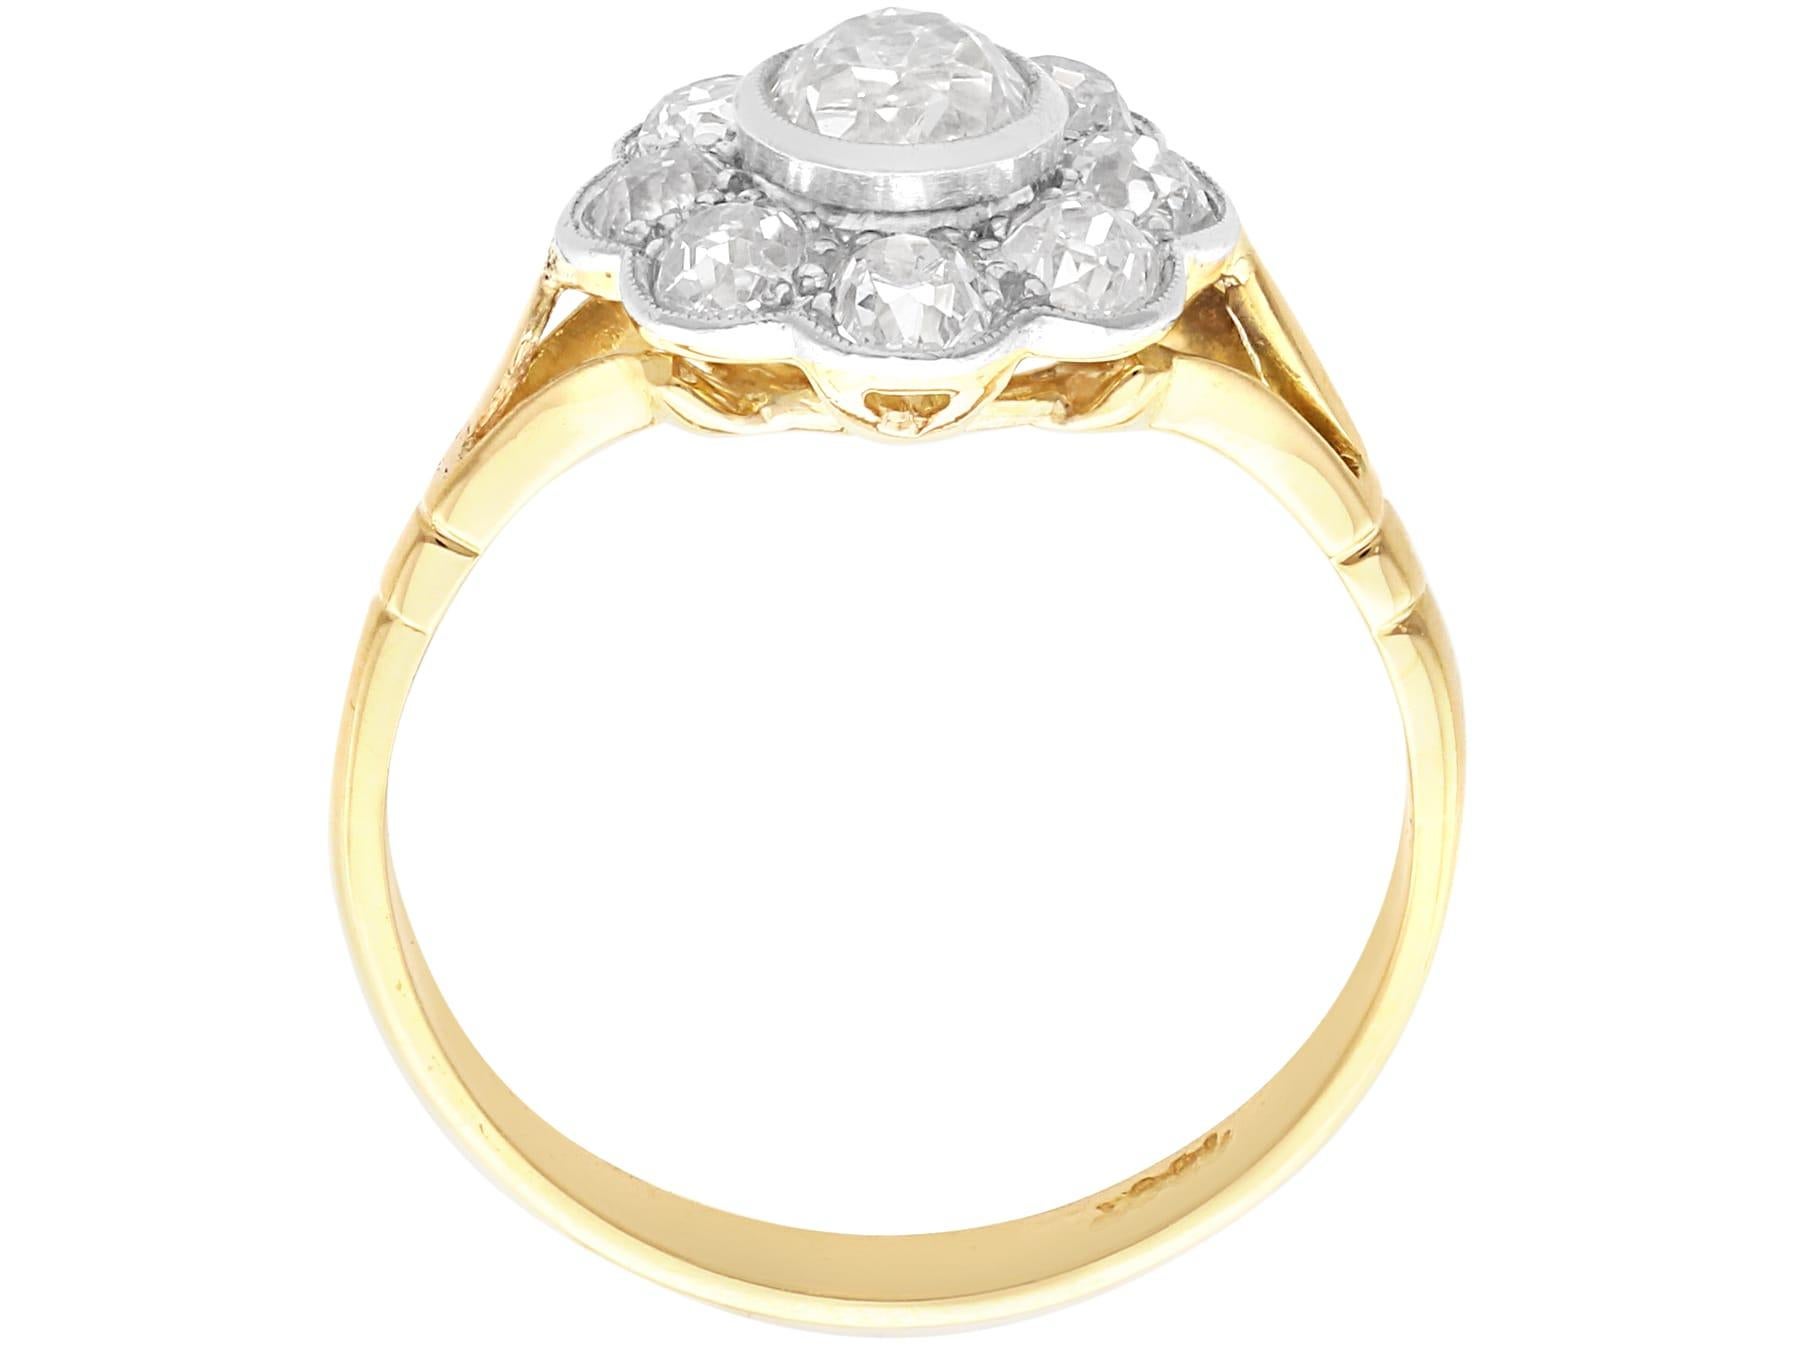 1900s Antique 1.34 Carat Diamond and 18k Yellow Gold Platinum Set Cocktail Ring In Excellent Condition For Sale In Jesmond, Newcastle Upon Tyne